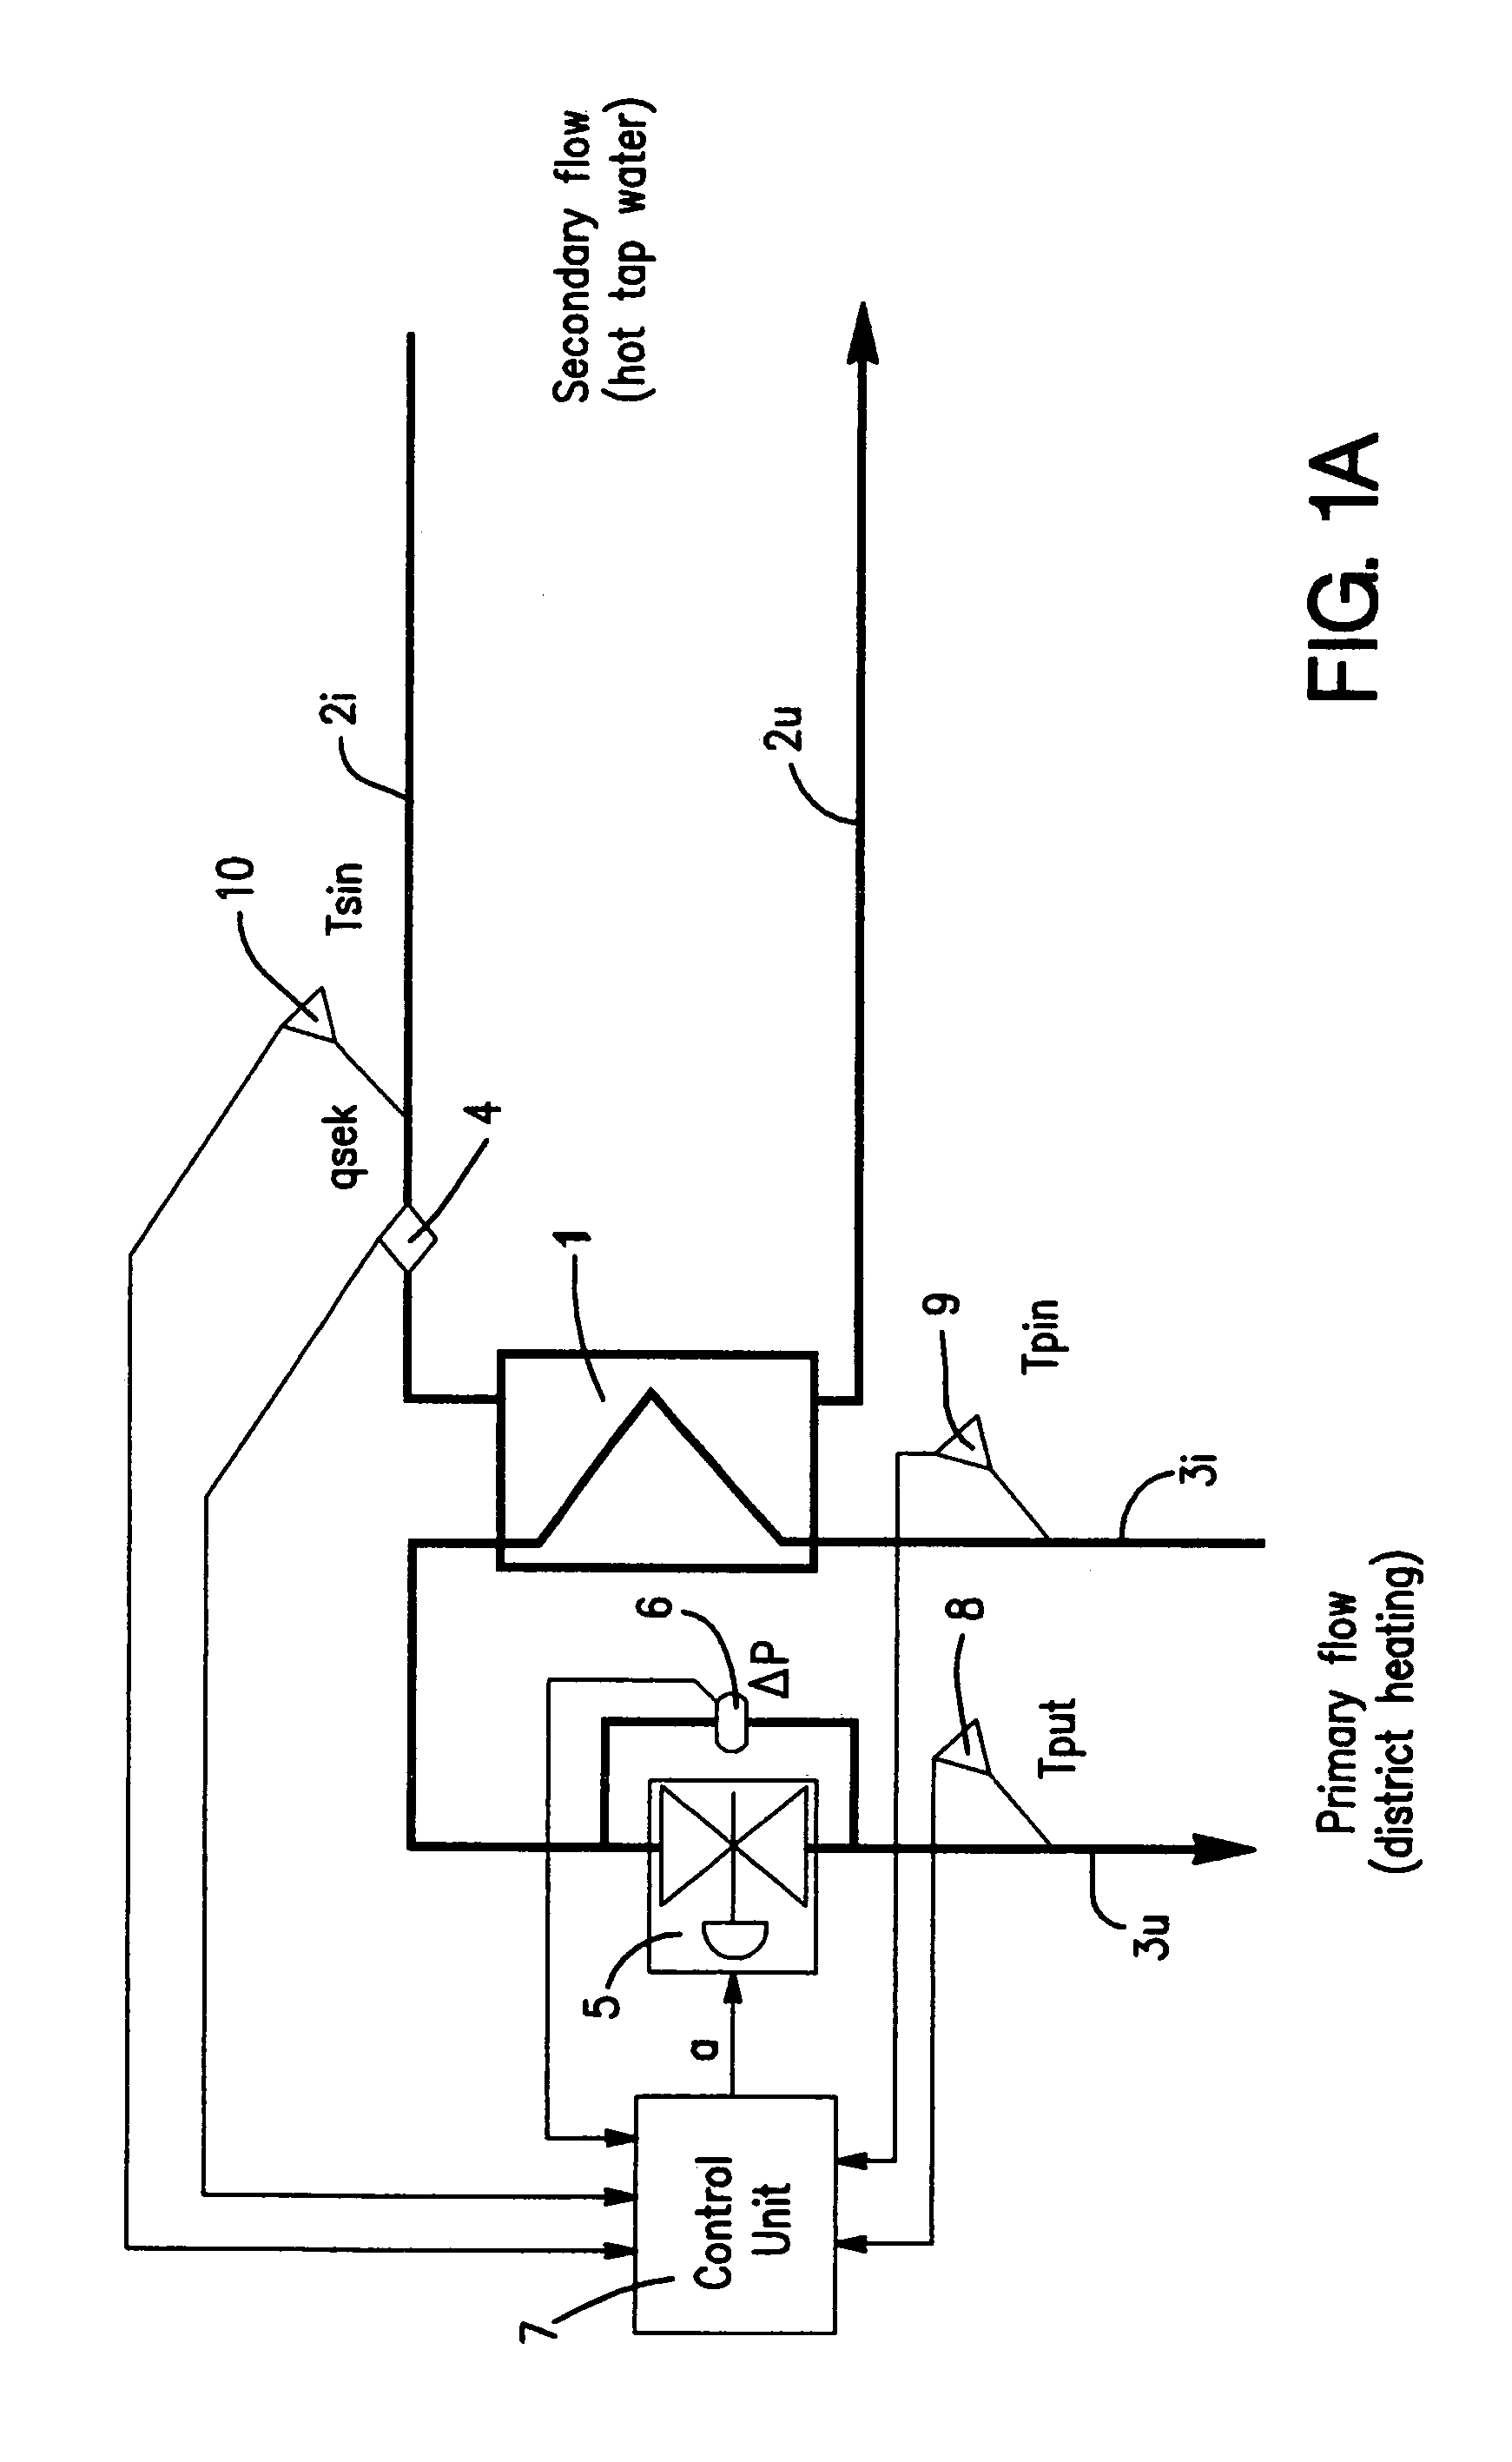 Method and arrangement for controlling the temperature of the outstream flow from a heat exchanger and measuring produced heat